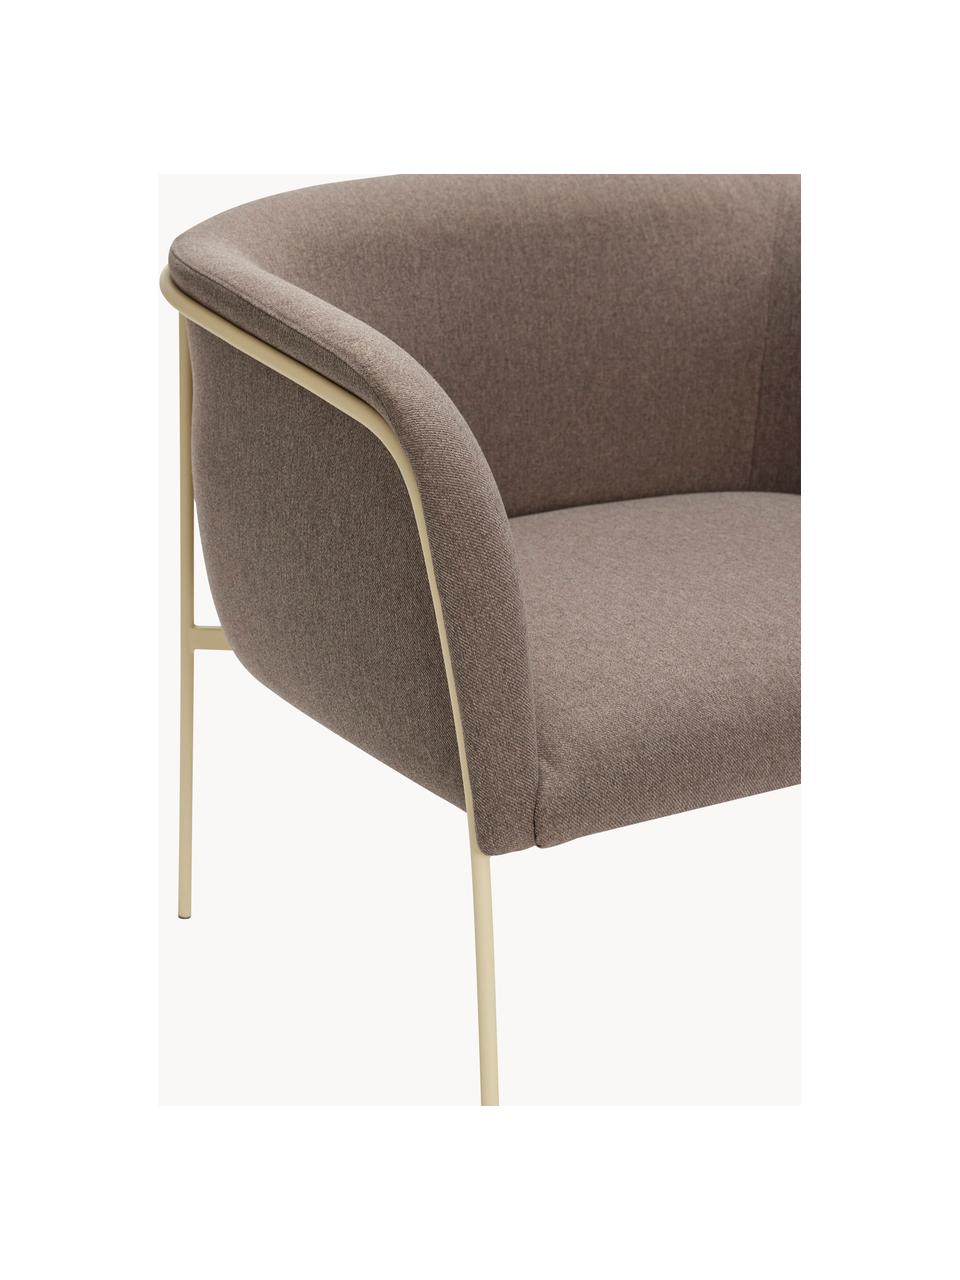 Fauteuil lounge Eyrie, Tissu taupe, beige clair, larg. 89 x prof. 58 cm